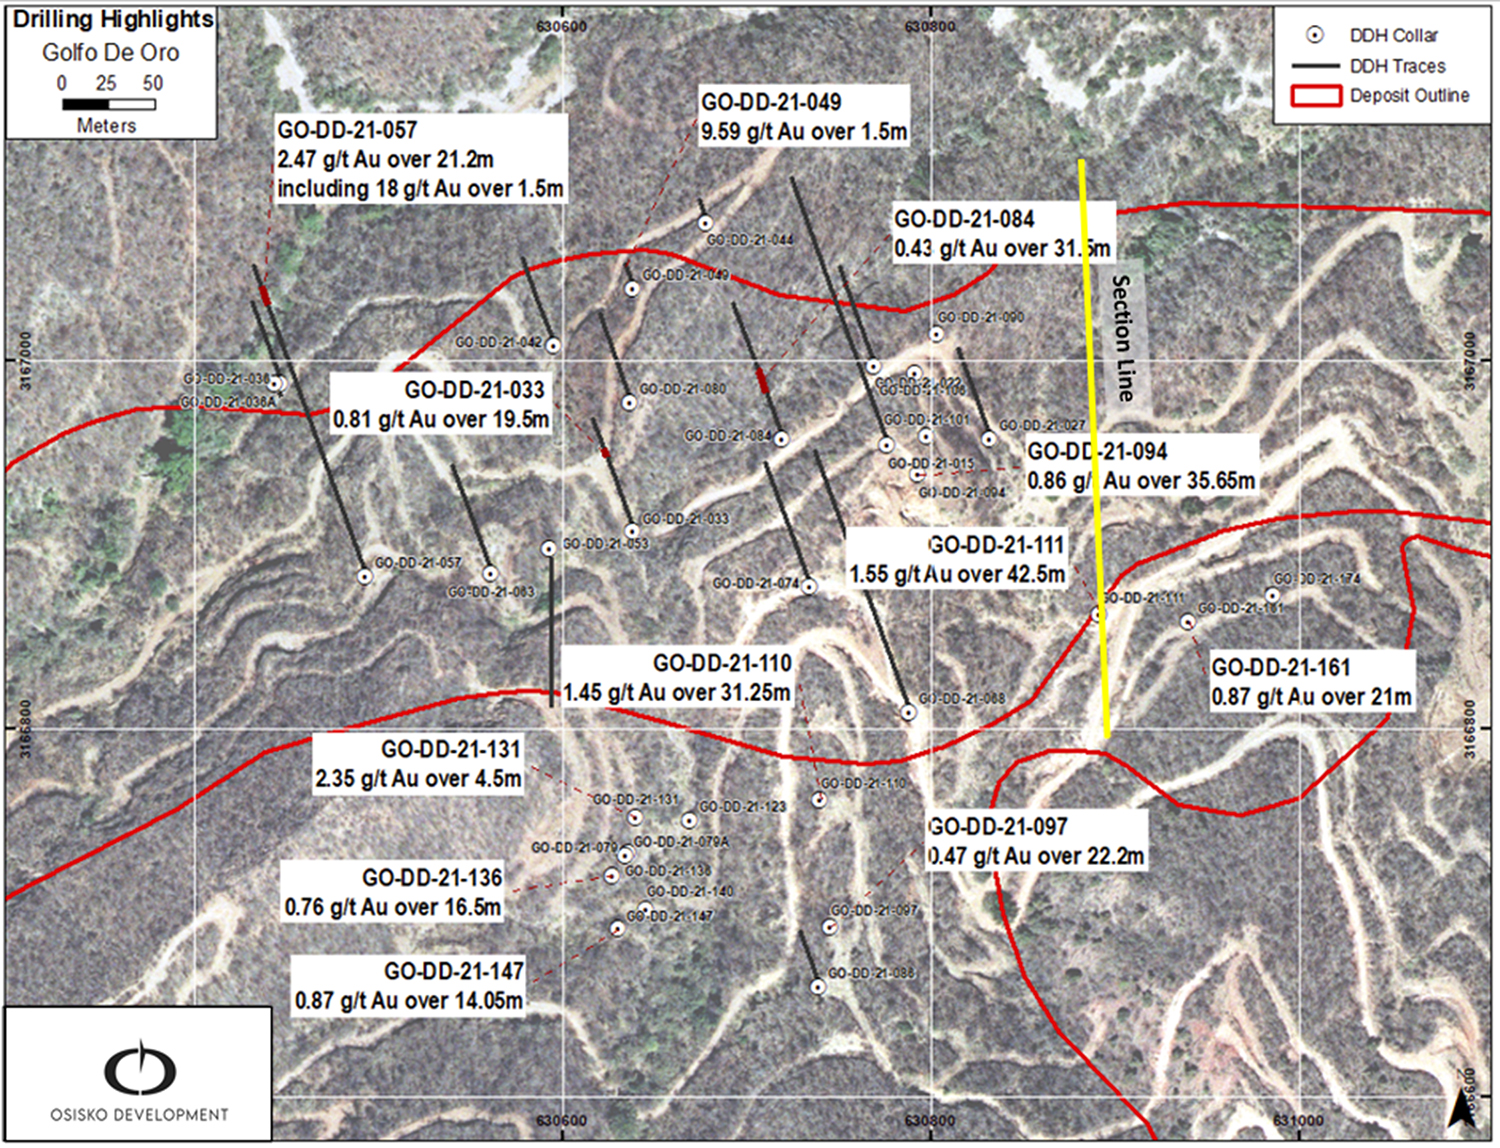 Figure 2: Golfo de Oro plan map with select drilling highlights